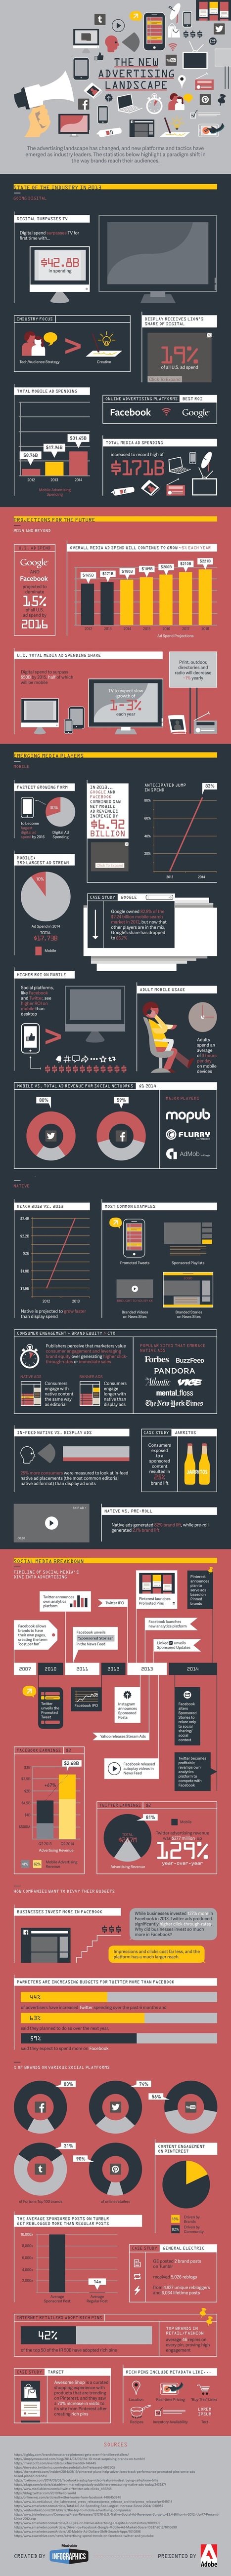 The New Advertising Landscape [Infographic] | E-Learning-Inclusivo (Mashup) | Scoop.it